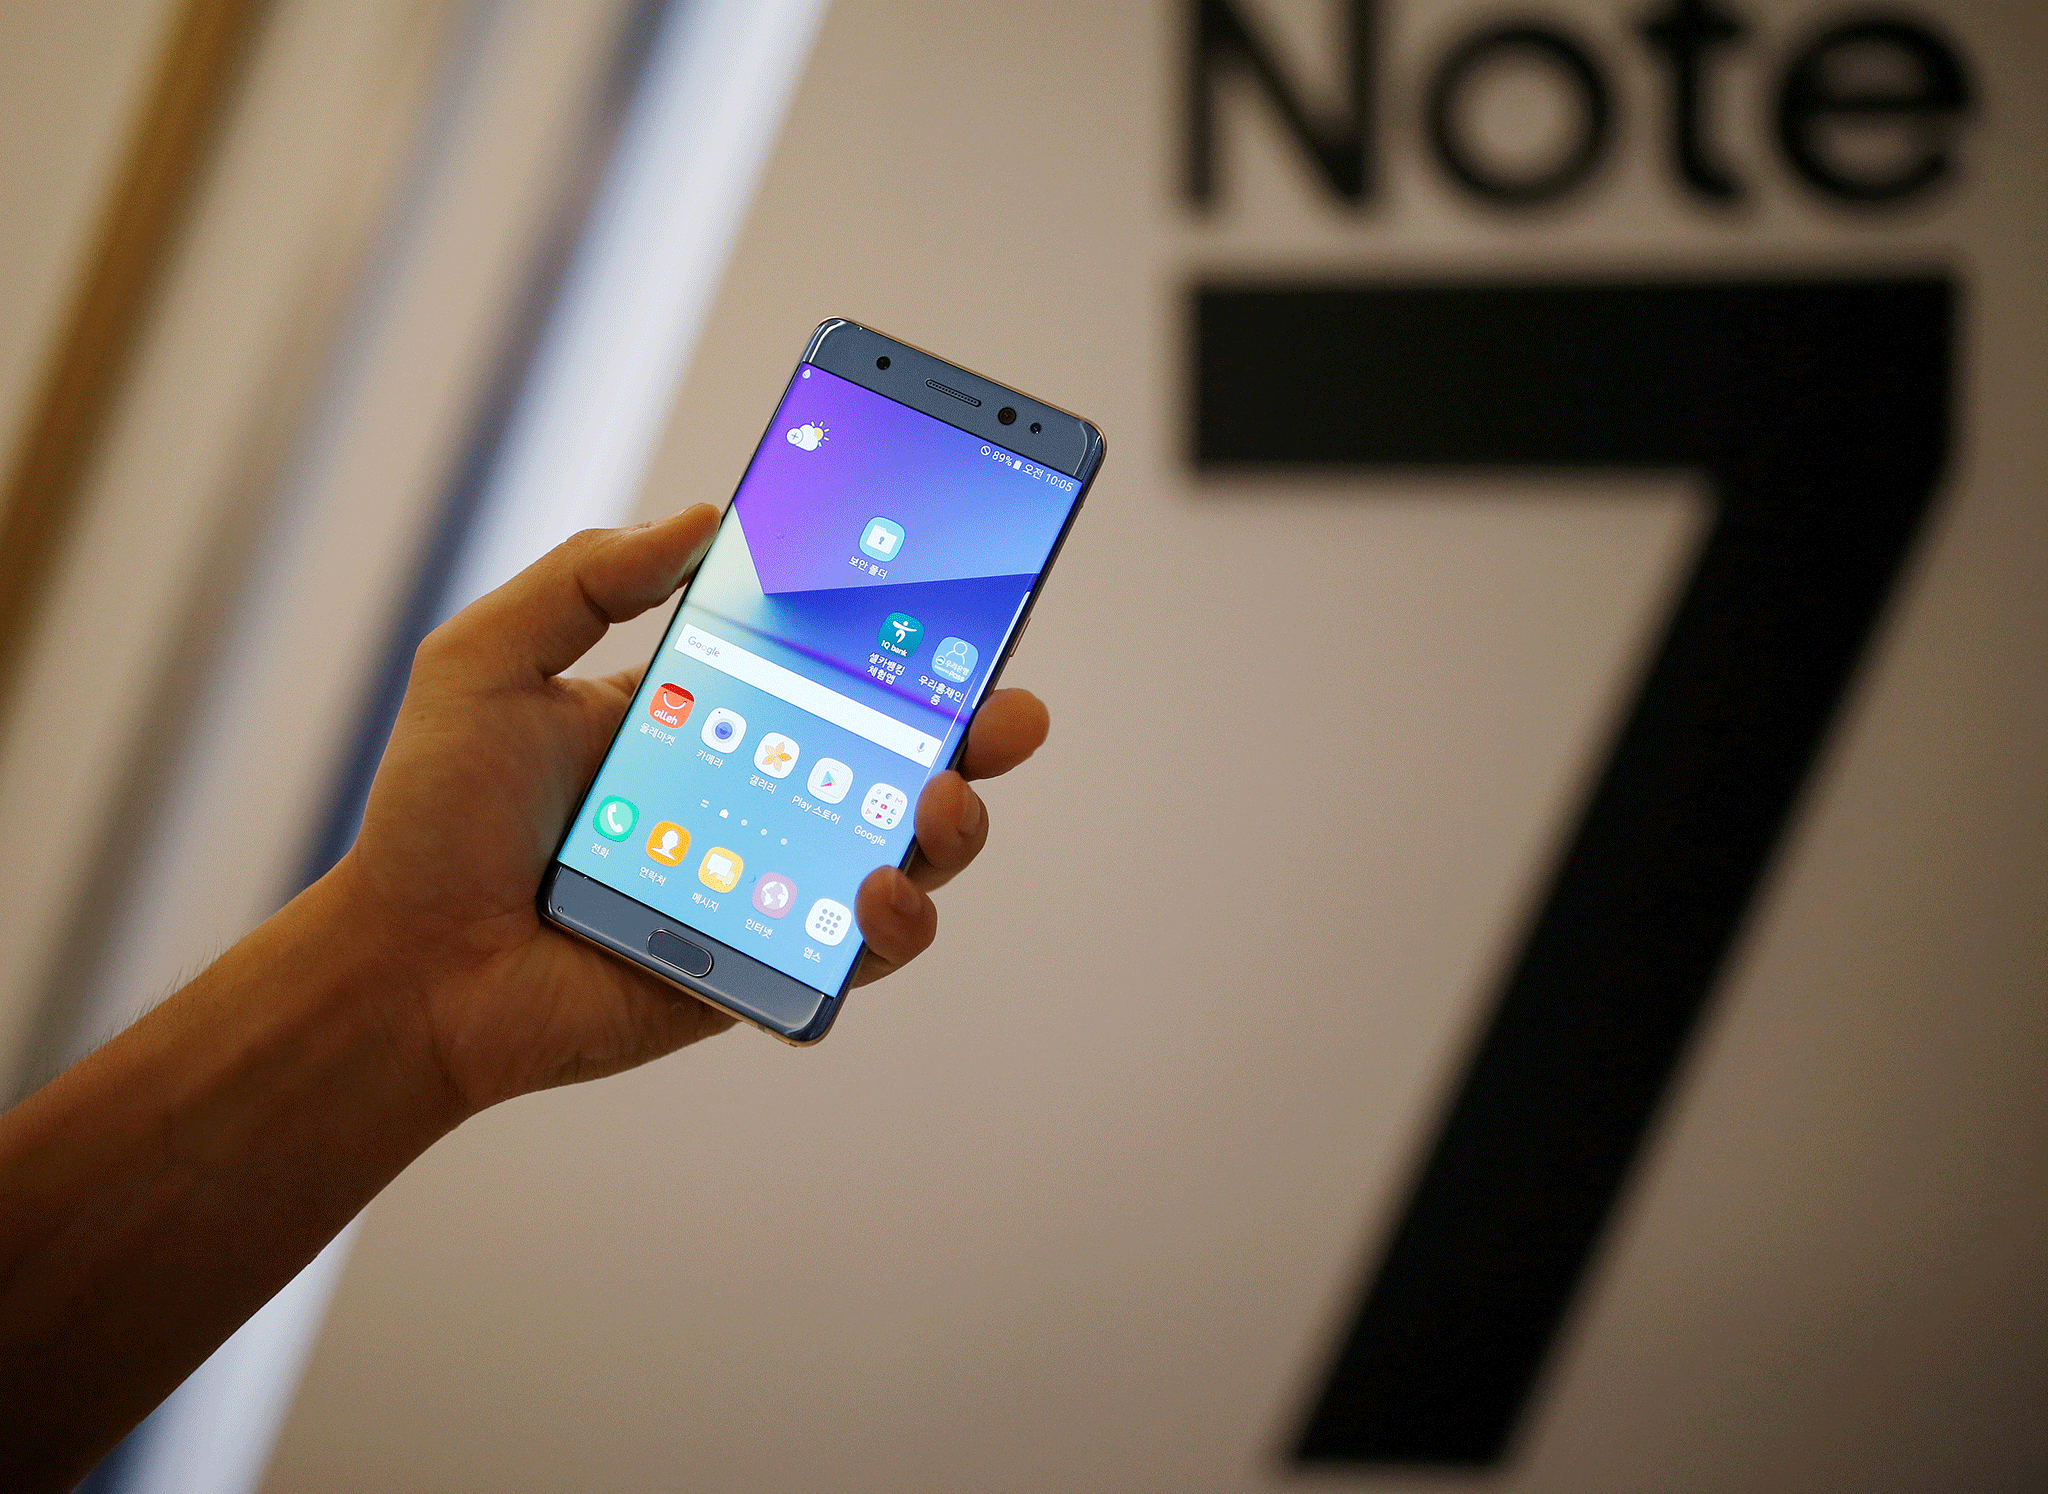 Read more

Samsung Galaxy Note 7 disaster wipes $19bn off company's value